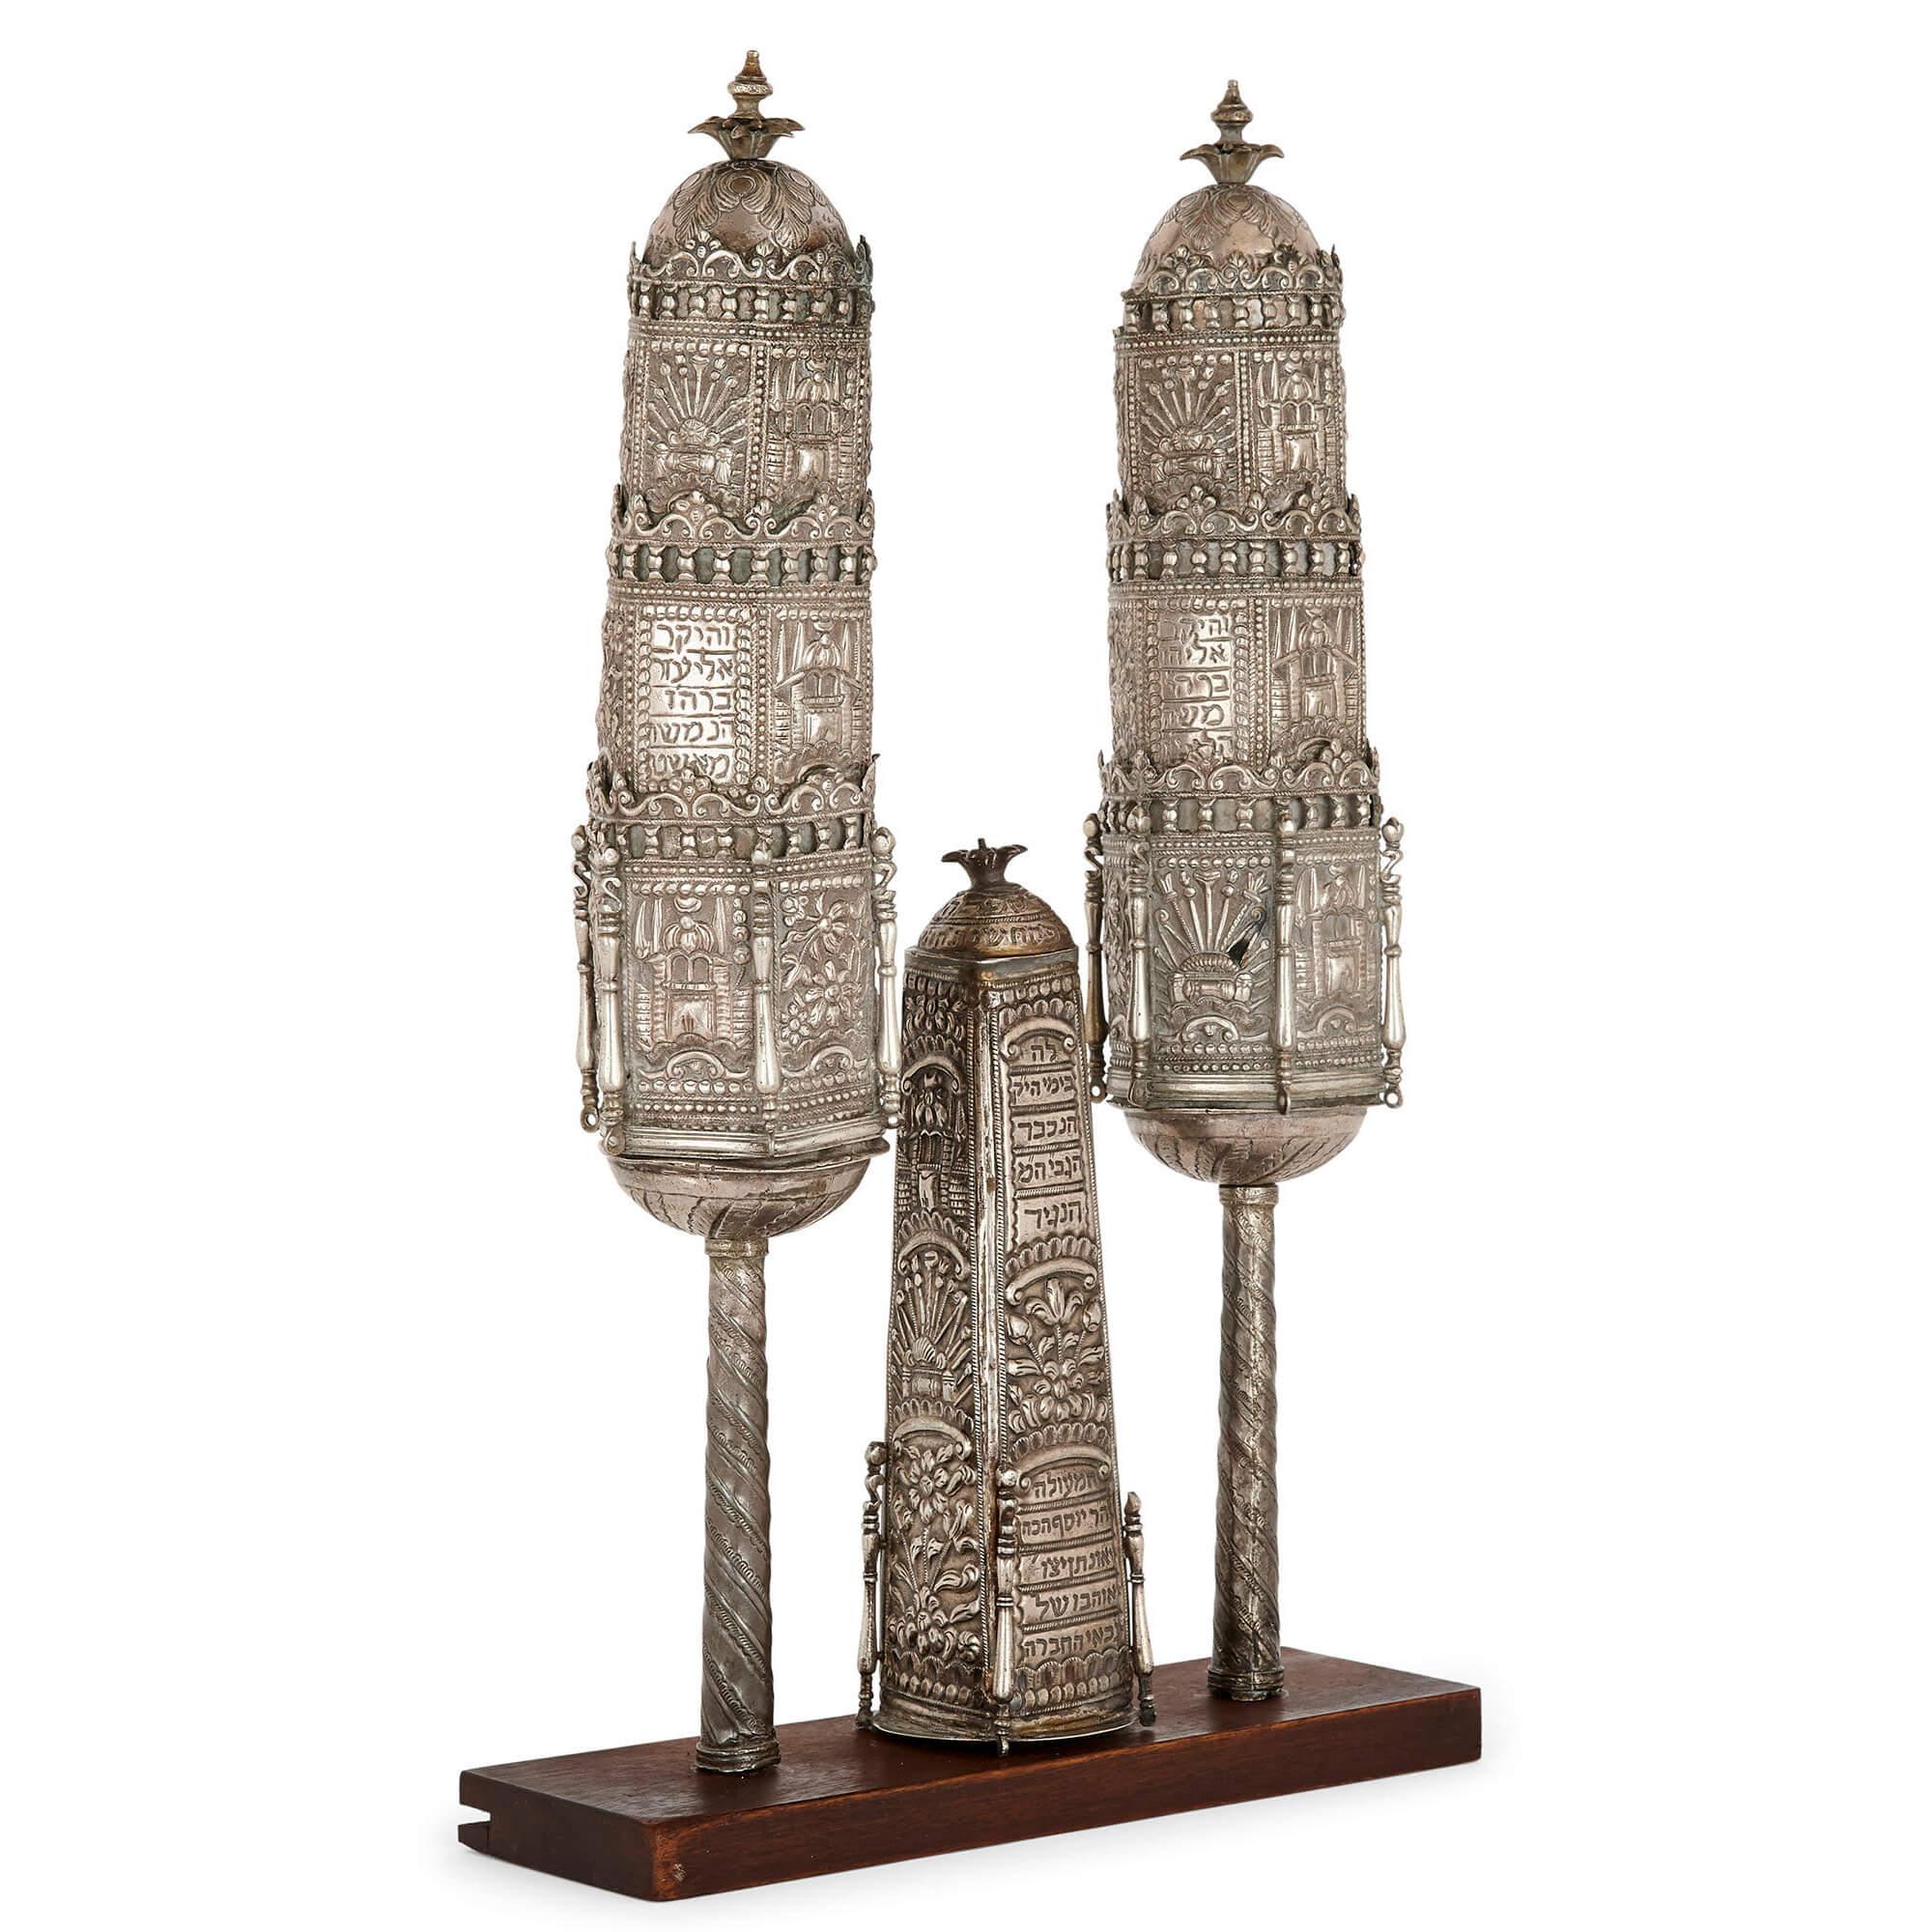 Set of Judaica silver Rimonim (Torah finials)
Middle-Eastern, c.1800
Pair: height 46cm, diameter 8cm
Single: height 24cm, diameter 17cm
Weight approximately 1,500 grams

In a tiered, hexagonal form, with galleries of balustrades, these fine